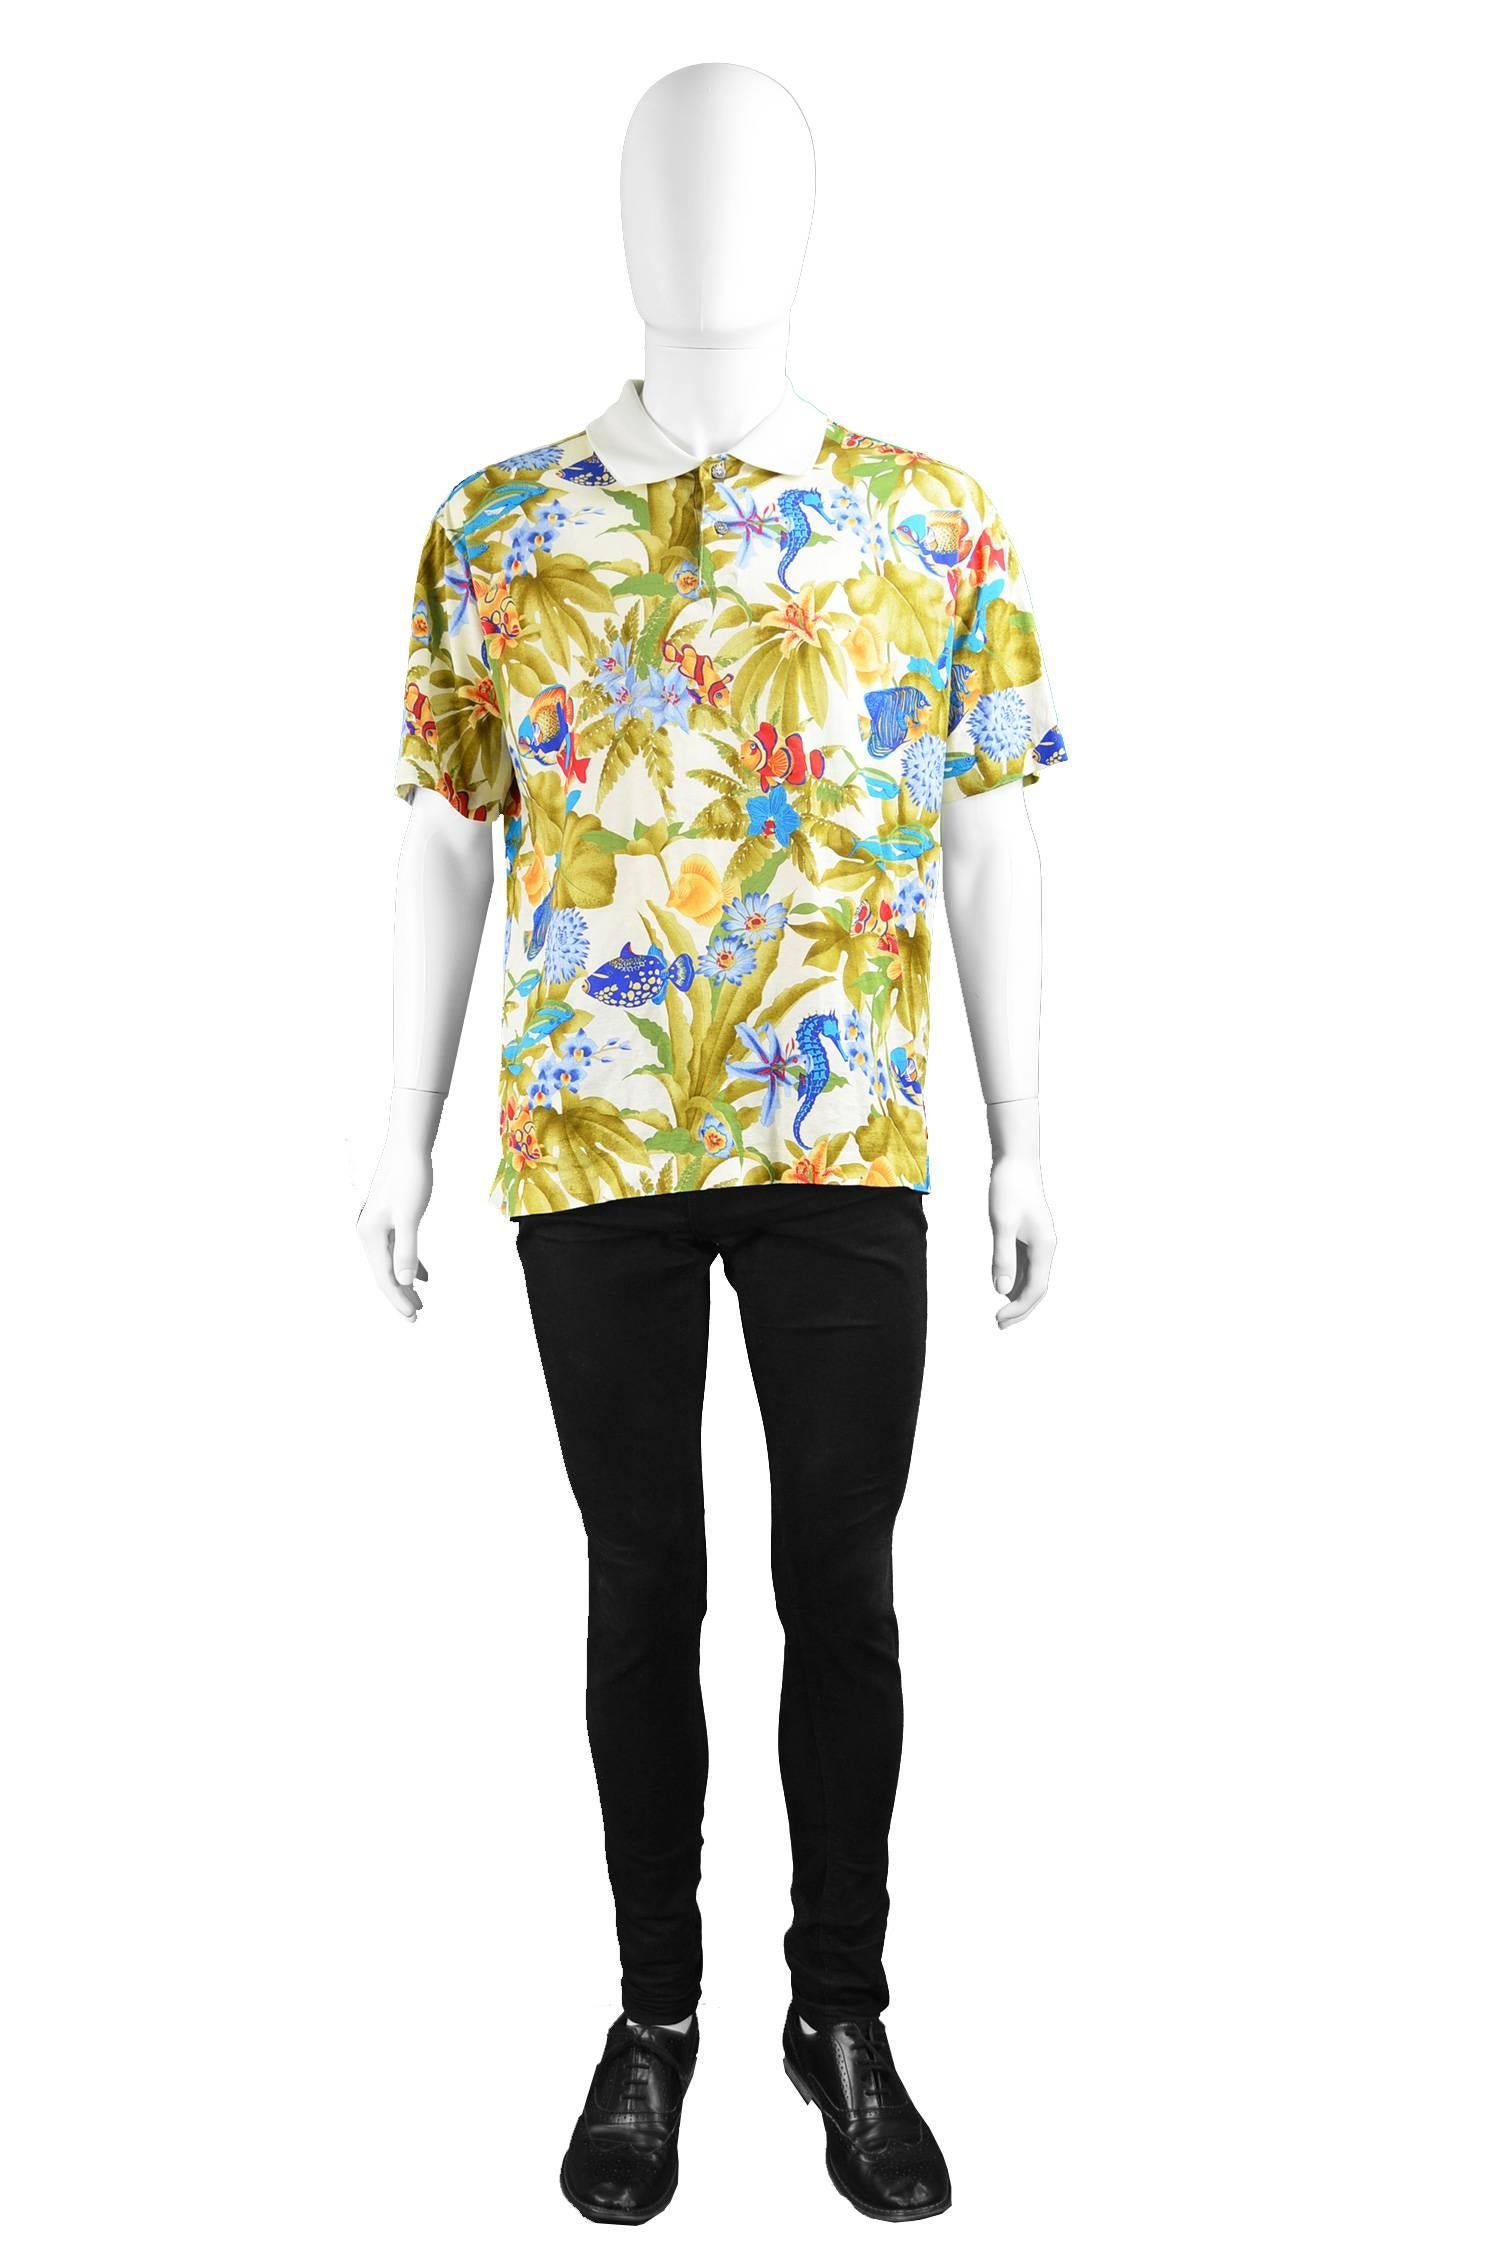 A vibrant and fun vintage men's short sleeve t shirt from the 90s by luxury French fashion house, Leonard of Paris for their rare men's 'Homme' line. In a super soft cotton jersey, printed with a bold, multicolored underwater theme, including floral